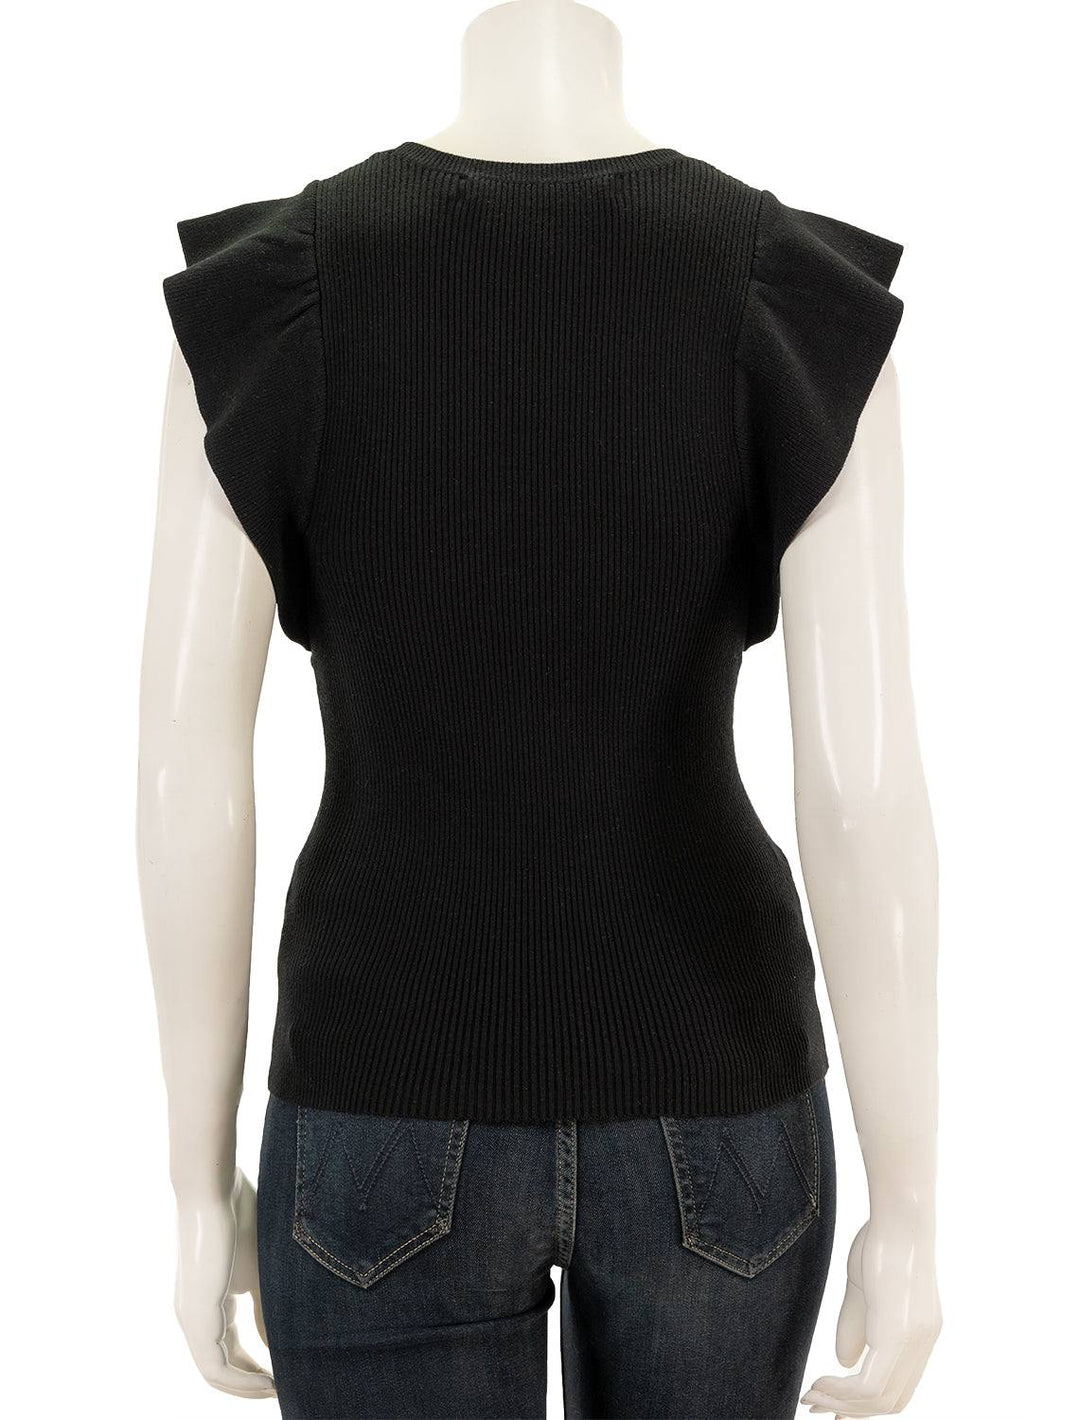 Back view of Marie Oliver's rory top in black.